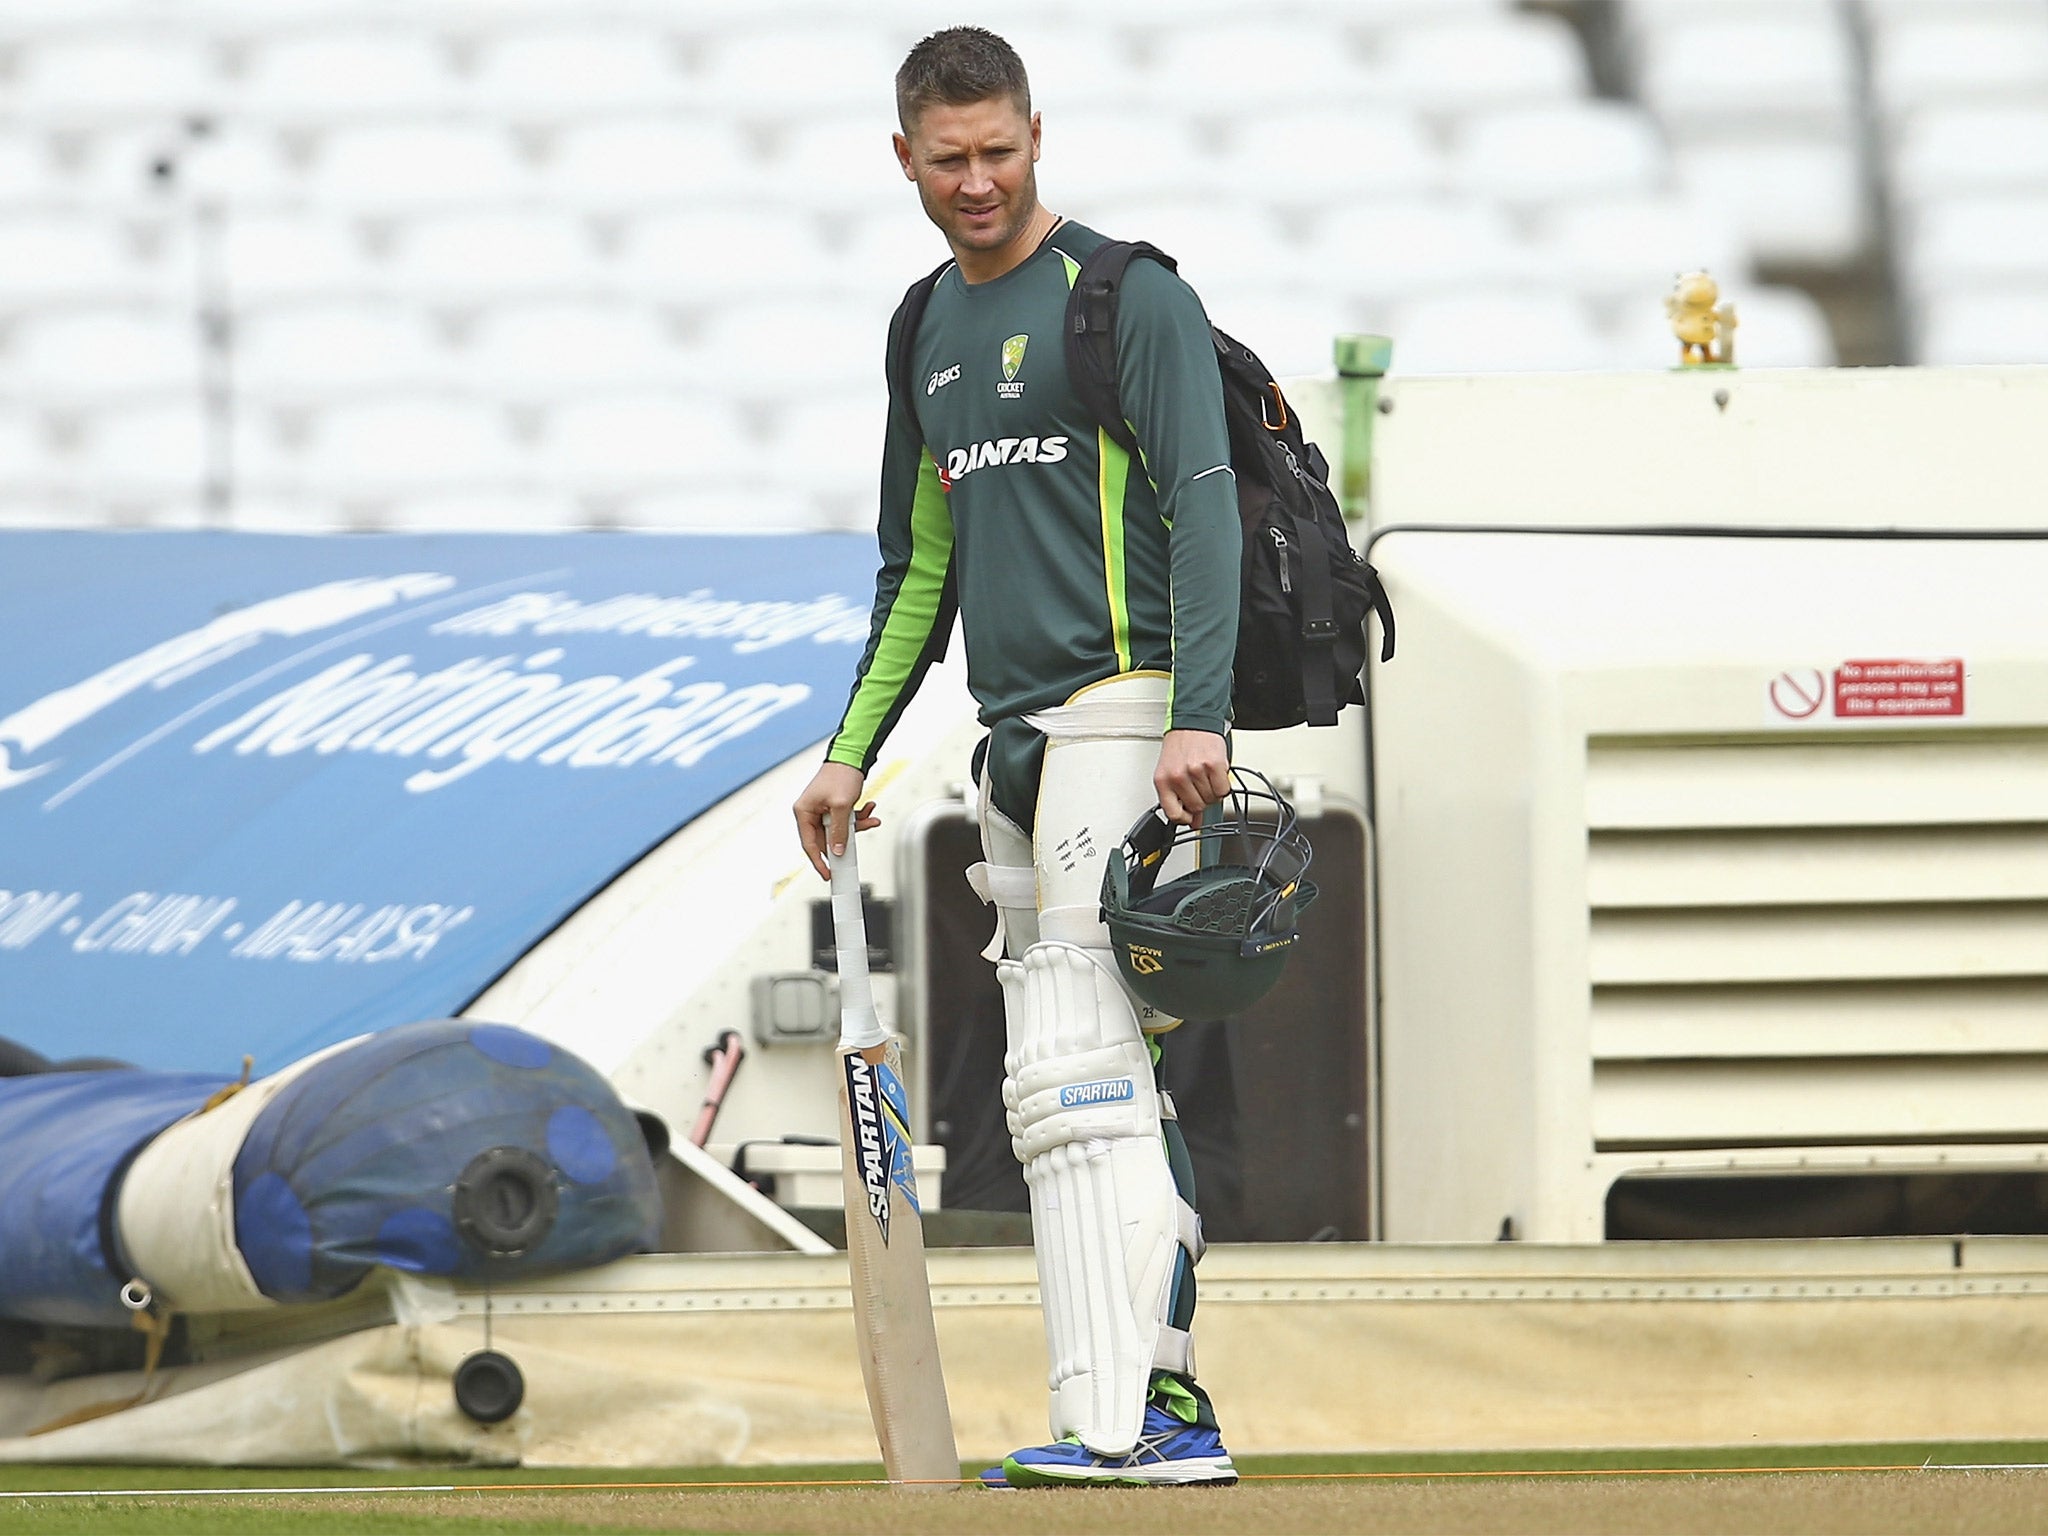 Michael Clarke arrives at Trent Bridge for a nets session ahead of the 4th Test